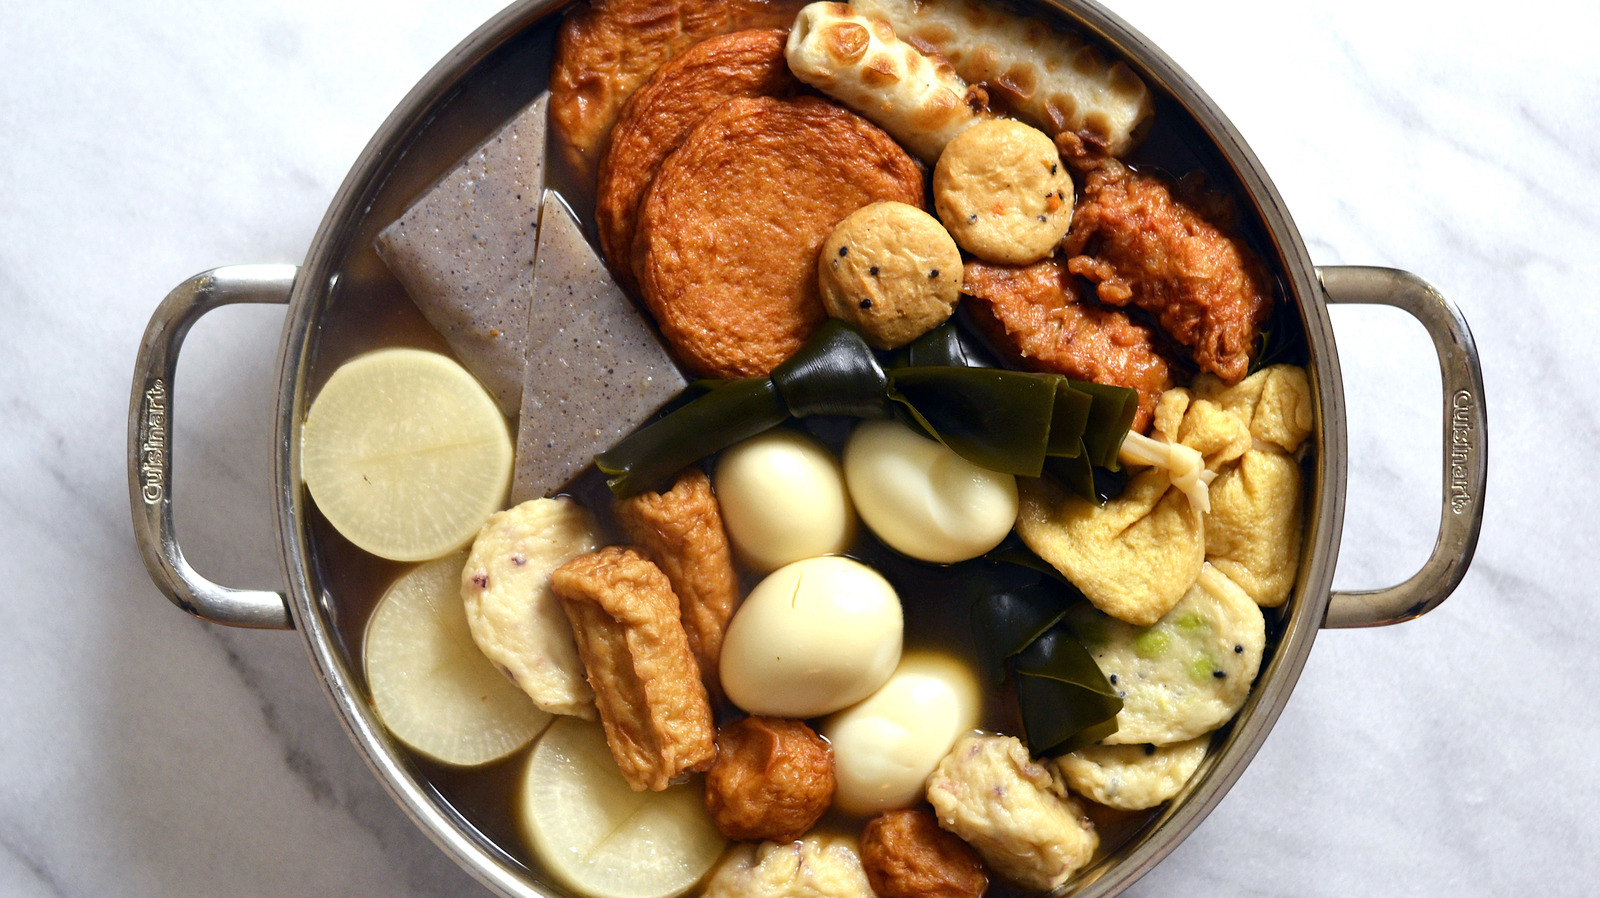 Oden (Japanese One-Pot Fish Cake Stew)